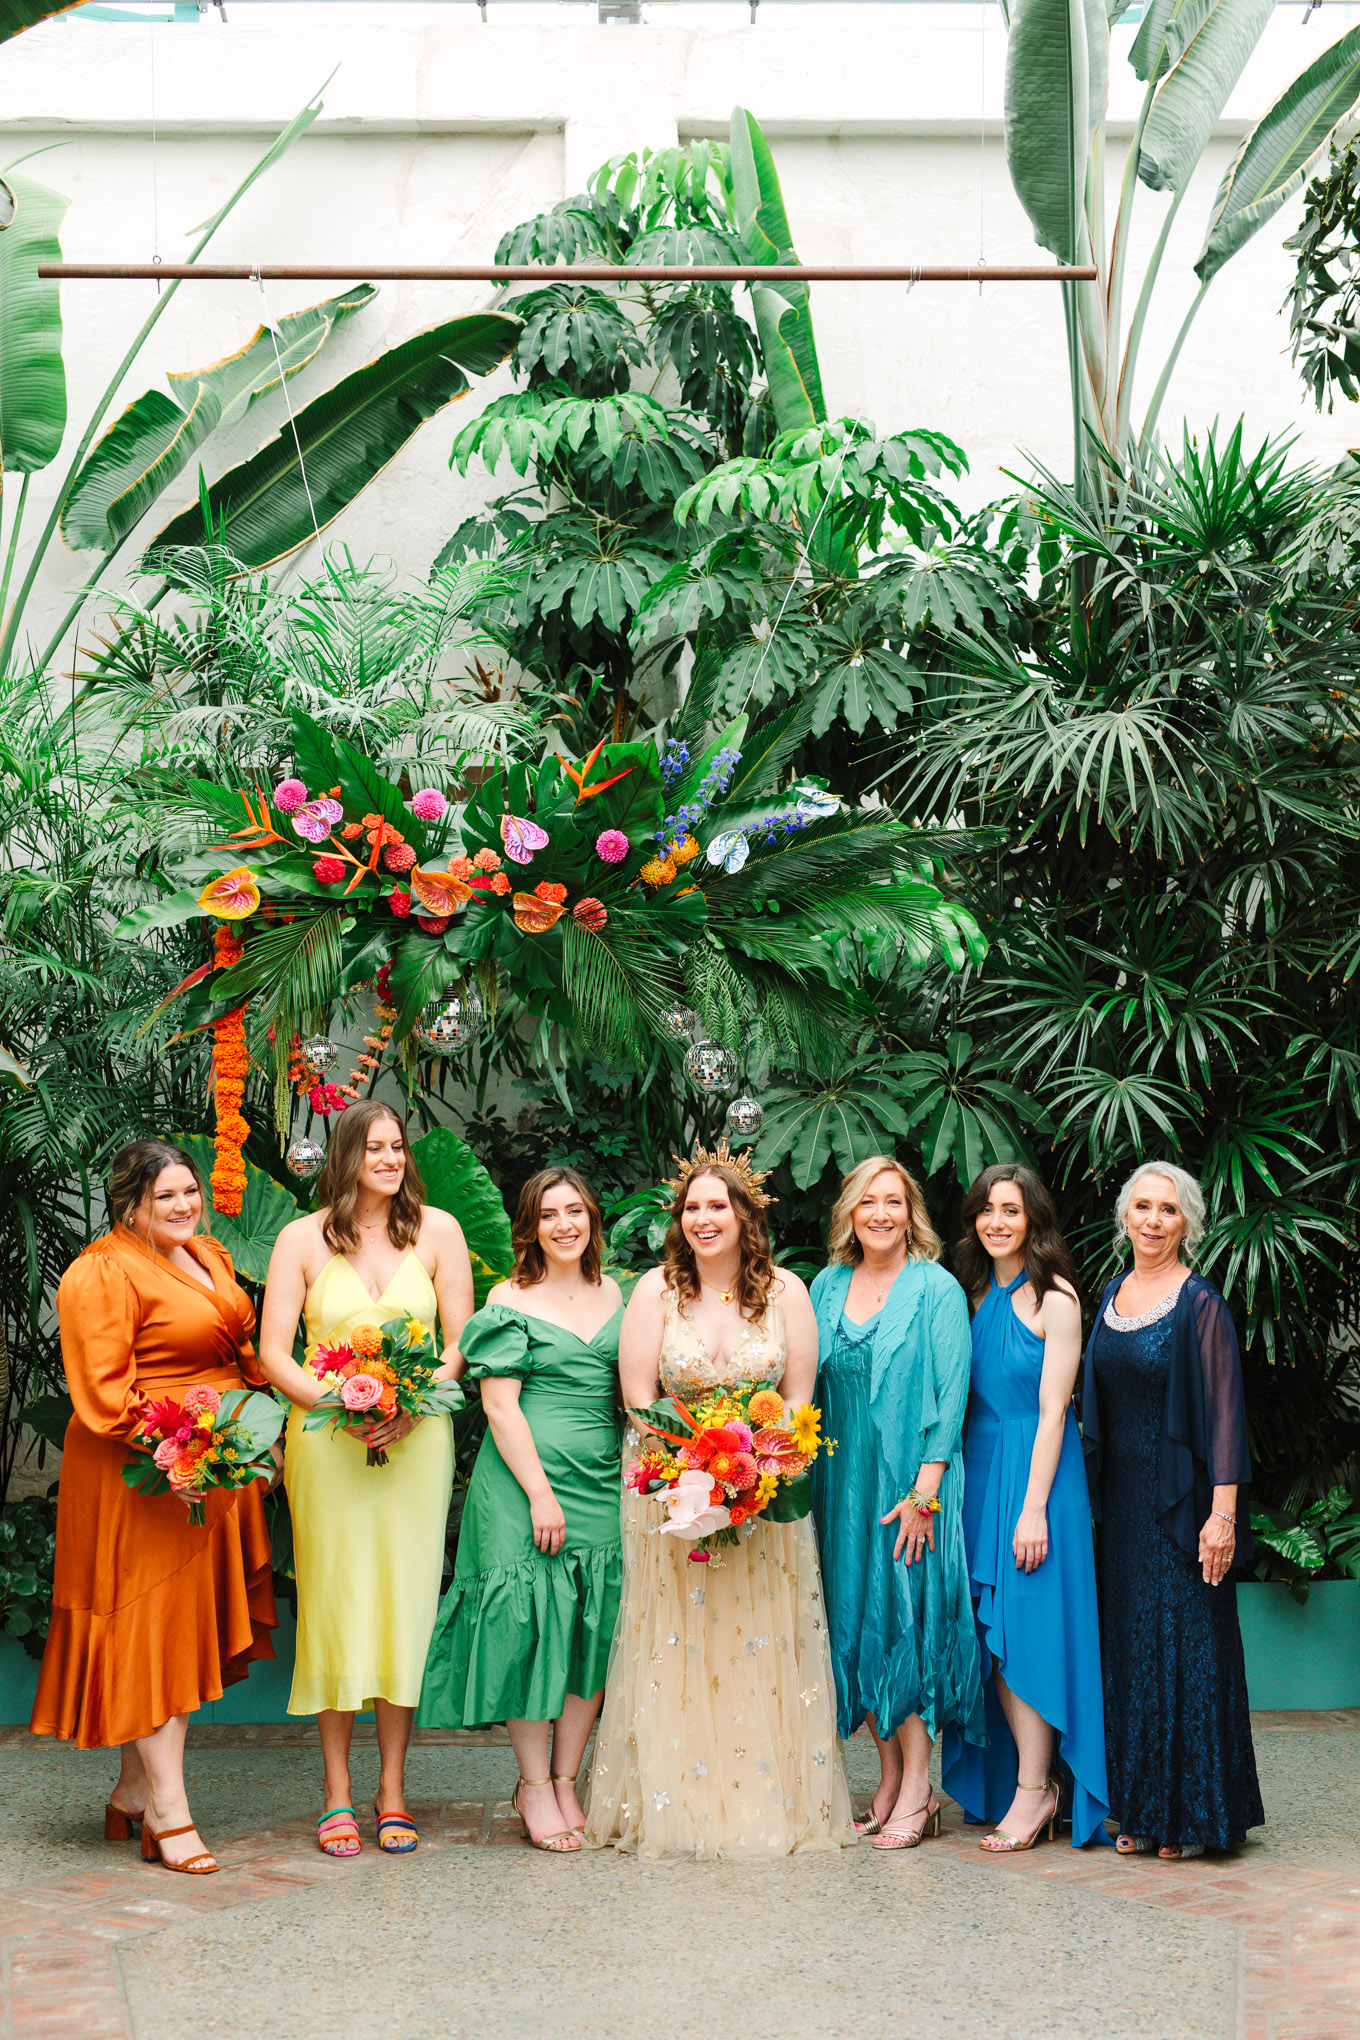 Bride with loved ones in rainbow formation | Colorful Downtown Los Angeles Valentine Wedding | Los Angeles wedding photographer | #losangeleswedding #colorfulwedding #DTLA #valentinedtla   Source: Mary Costa Photography | Los Angeles